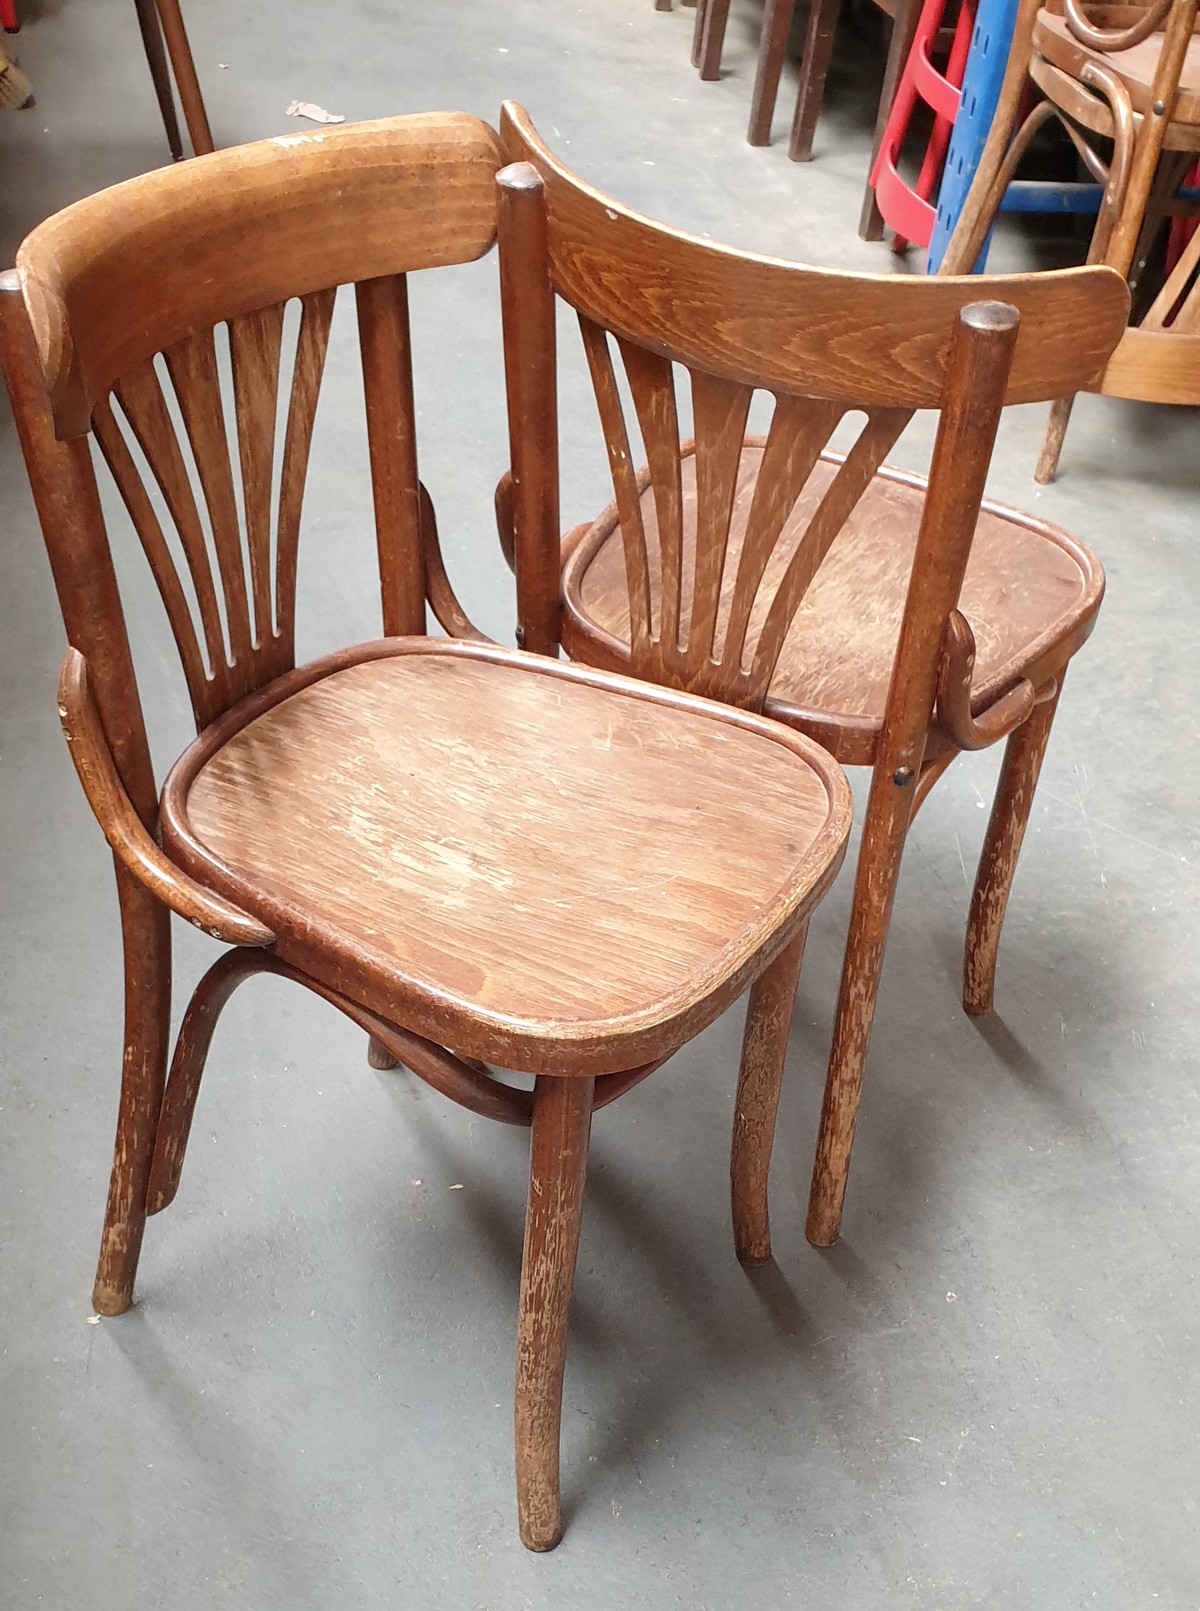 2nd Hand Wooden Fanback Chairs 865 